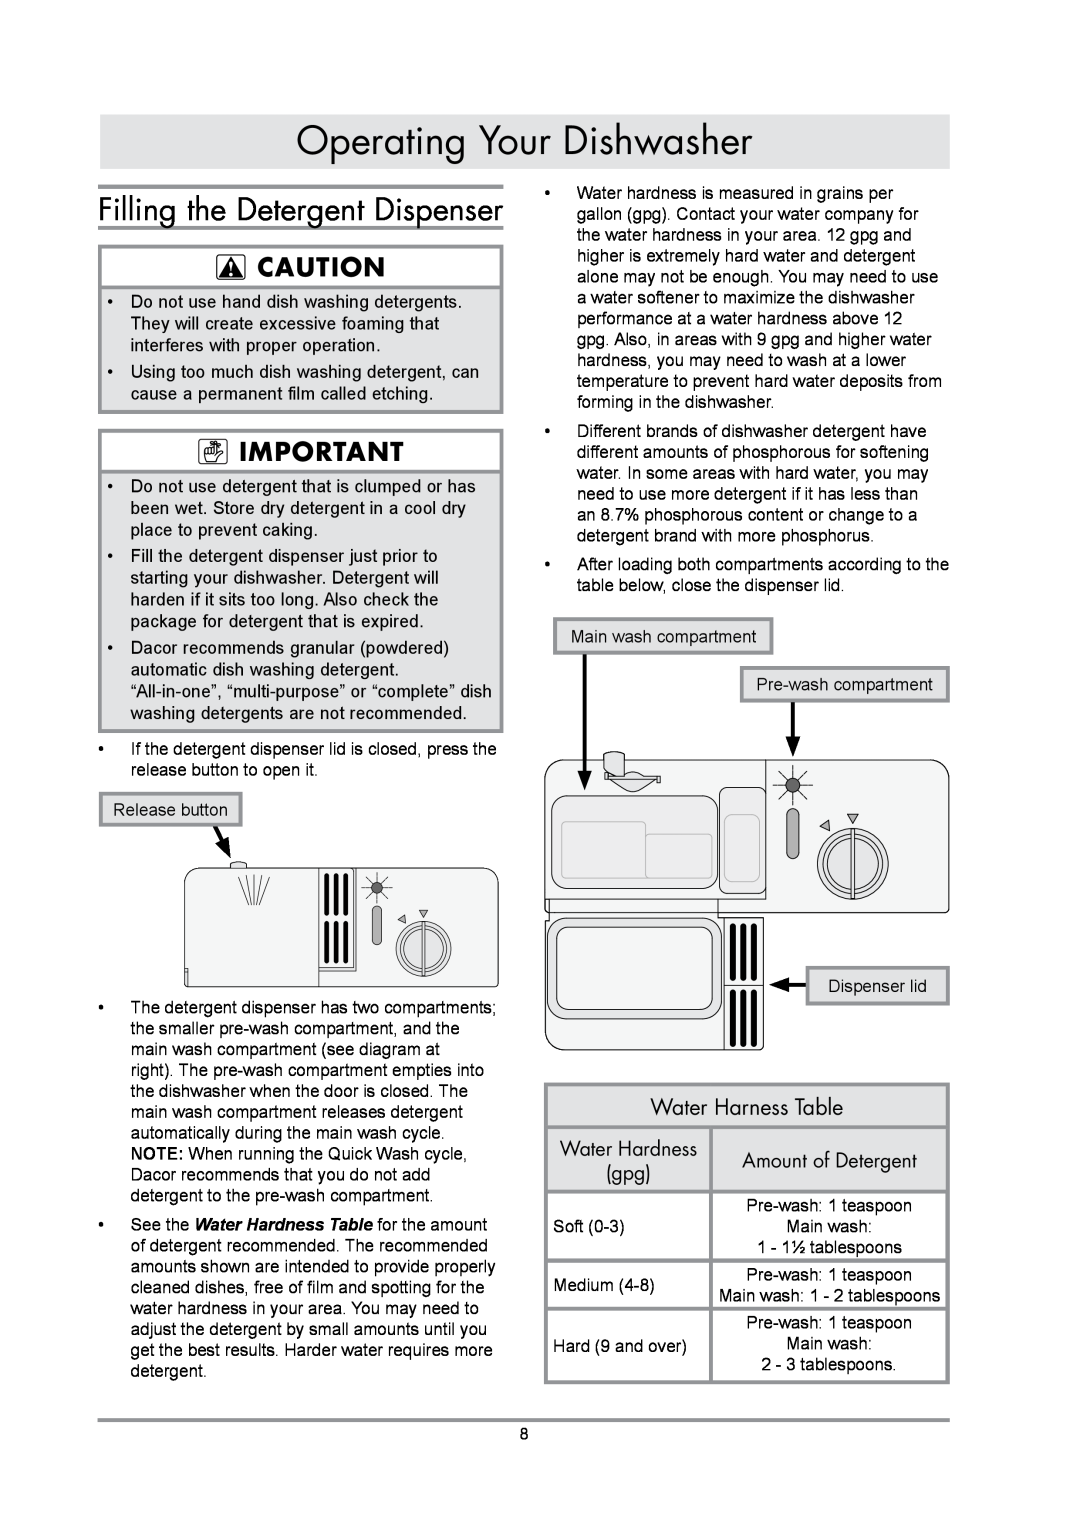 Dacor DDWF24S important safety instructions Operating Your Dishwasher, Filling the Detergent Dispenser, Water Harness Table 